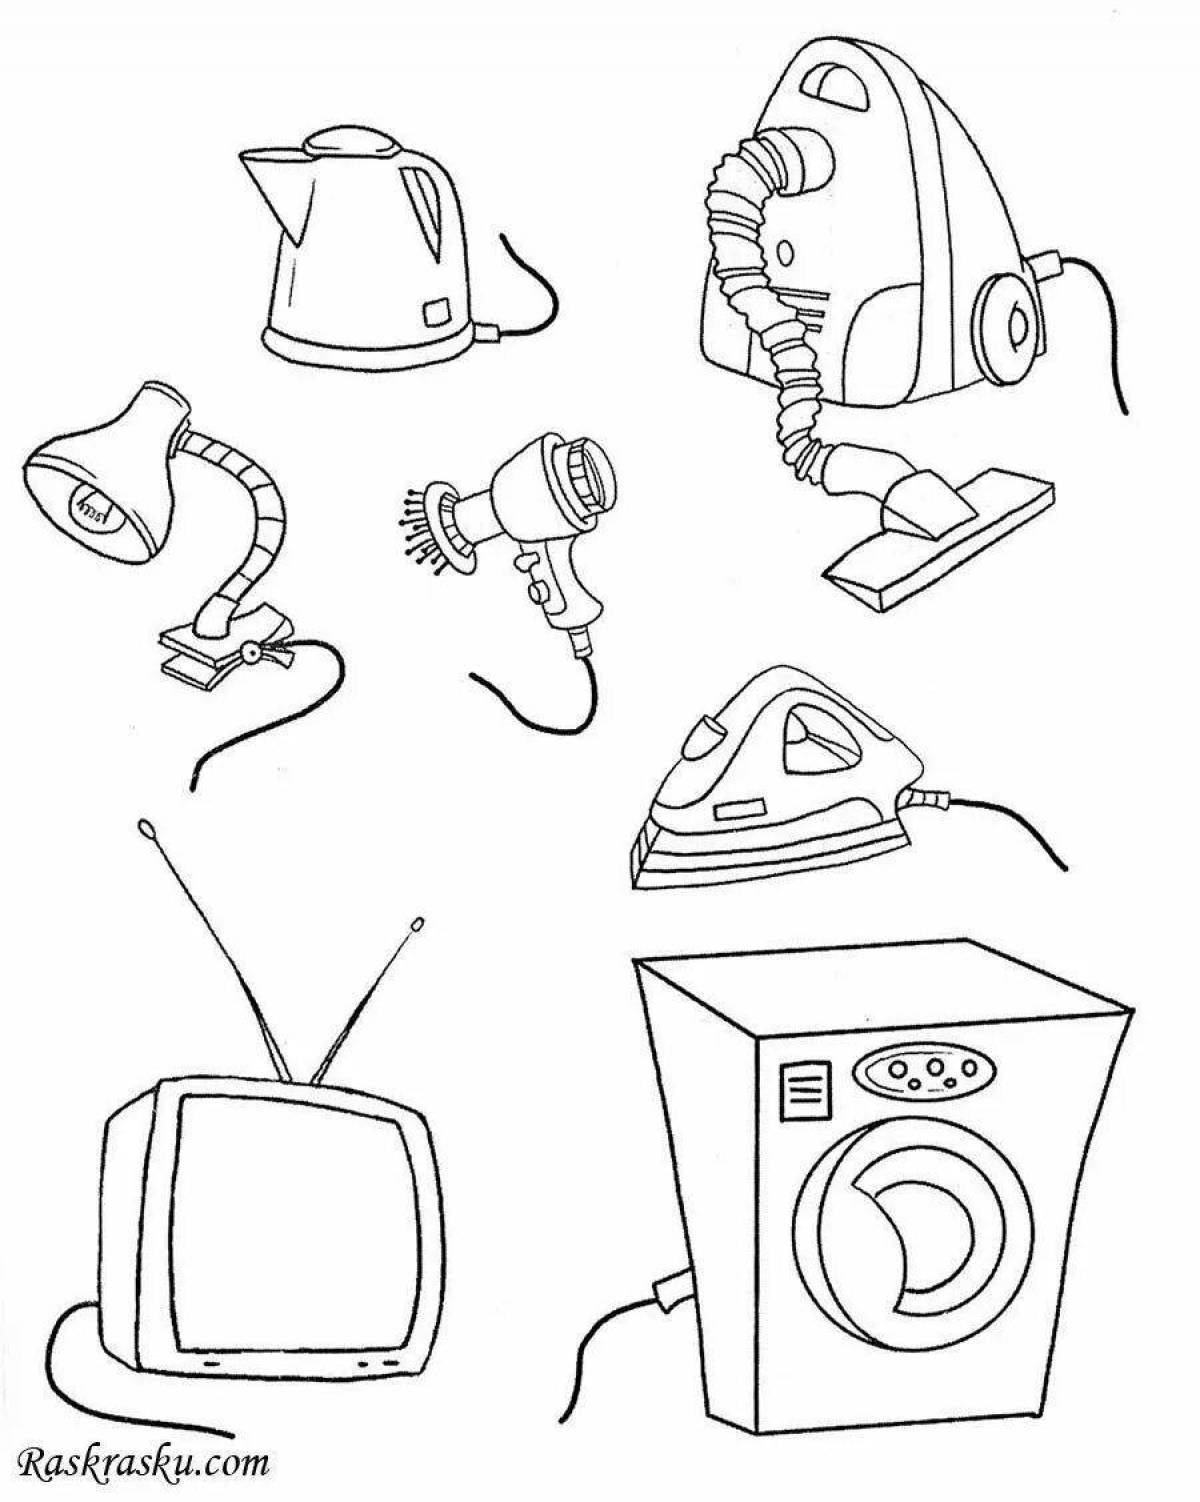 A fascinating coloring book for household appliances for children 3-4 years old